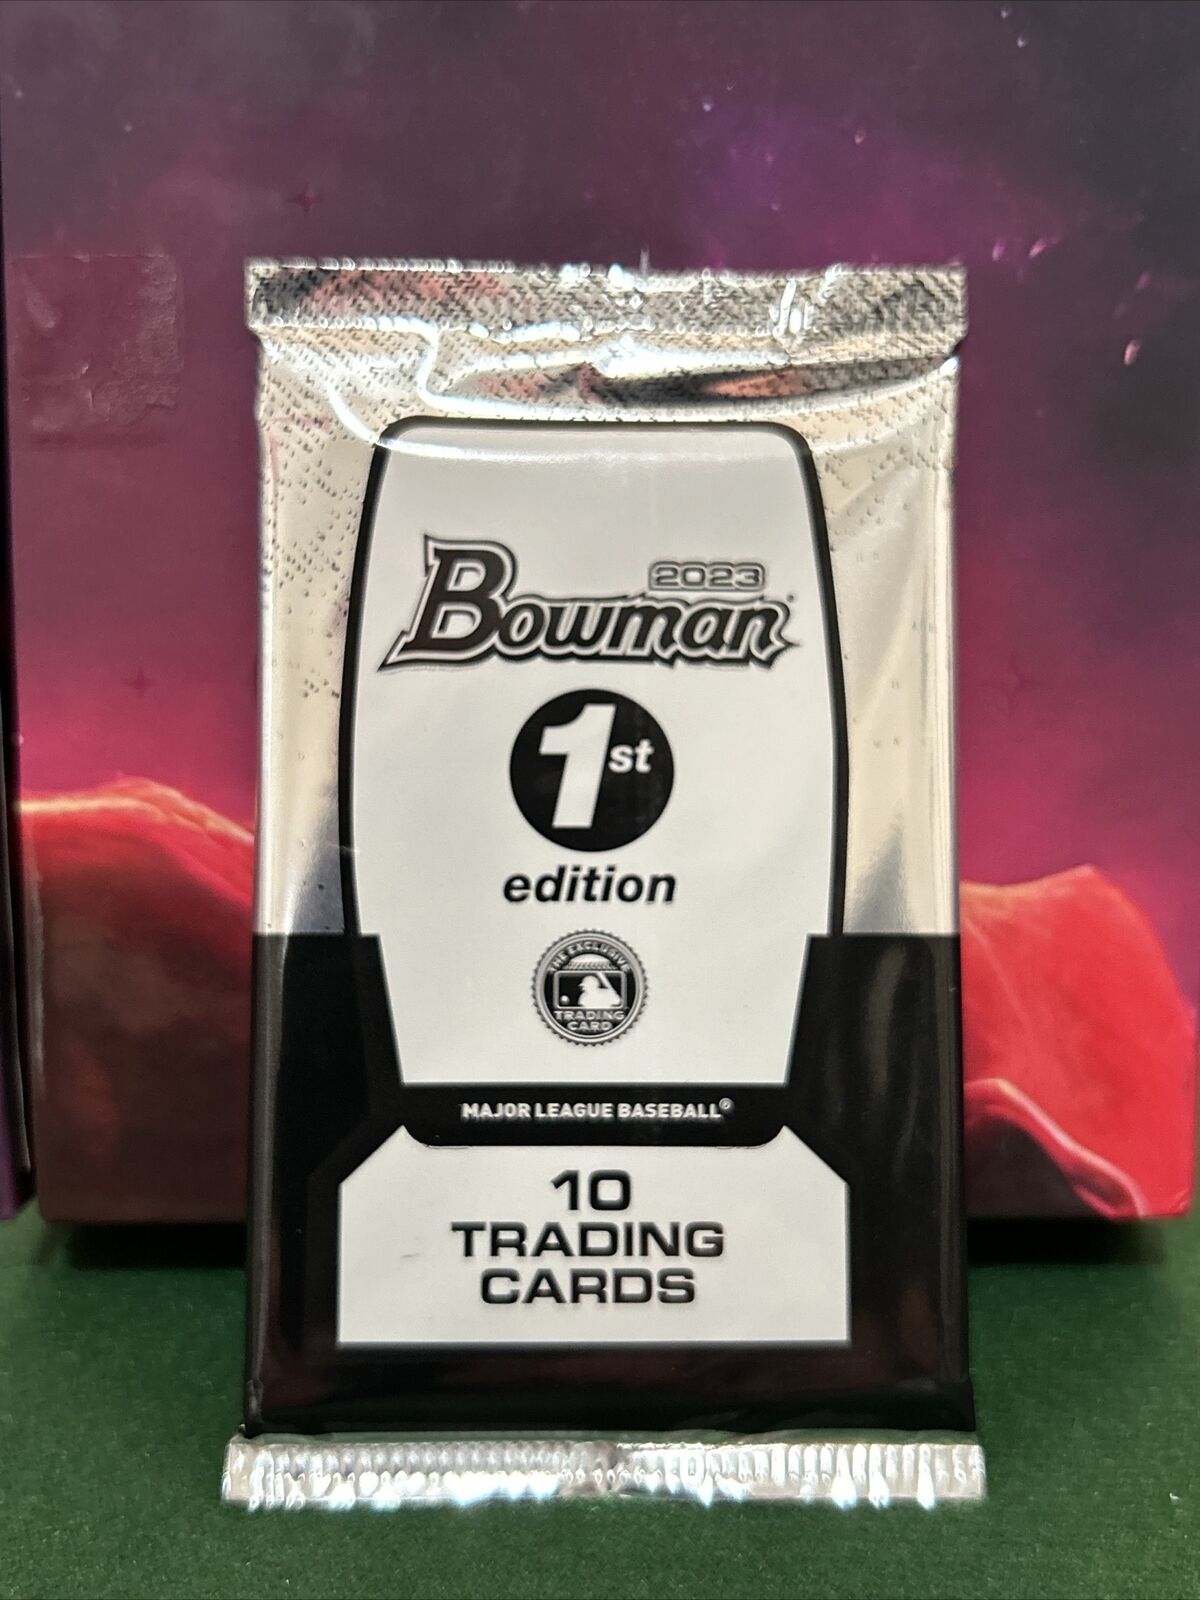 2023 Bowman 1st edition pack (1 Factory Sealed Unopened Pack) Baseball